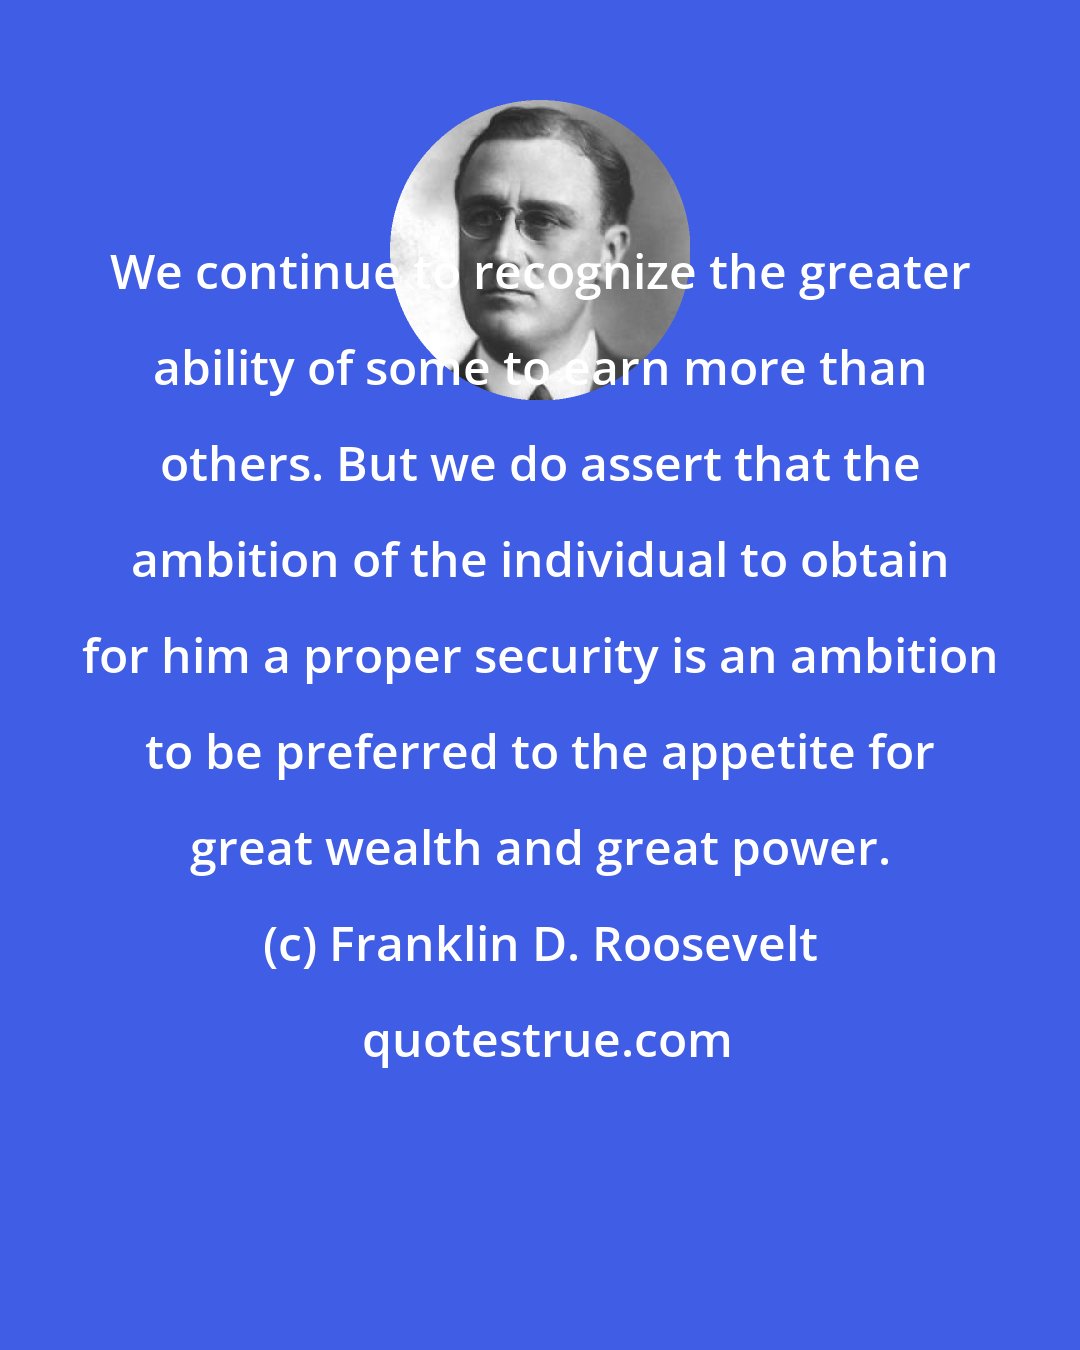 Franklin D. Roosevelt: We continue to recognize the greater ability of some to earn more than others. But we do assert that the ambition of the individual to obtain for him a proper security is an ambition to be preferred to the appetite for great wealth and great power.